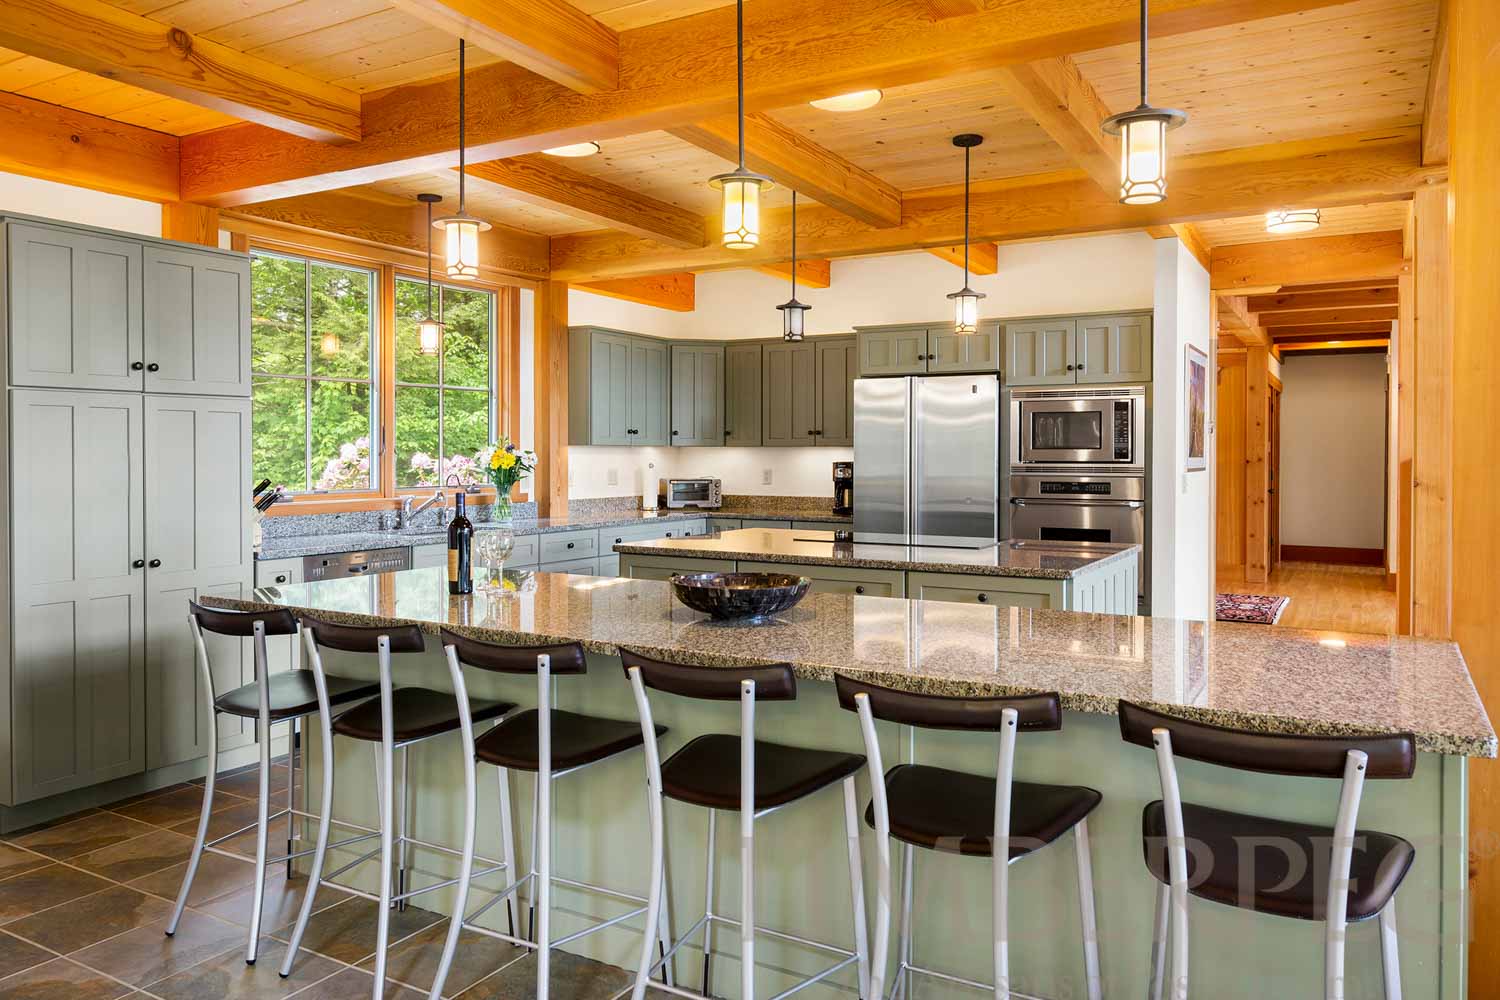 High Ridge, NH (5624) kitchen with large island and then another long island with bar seating